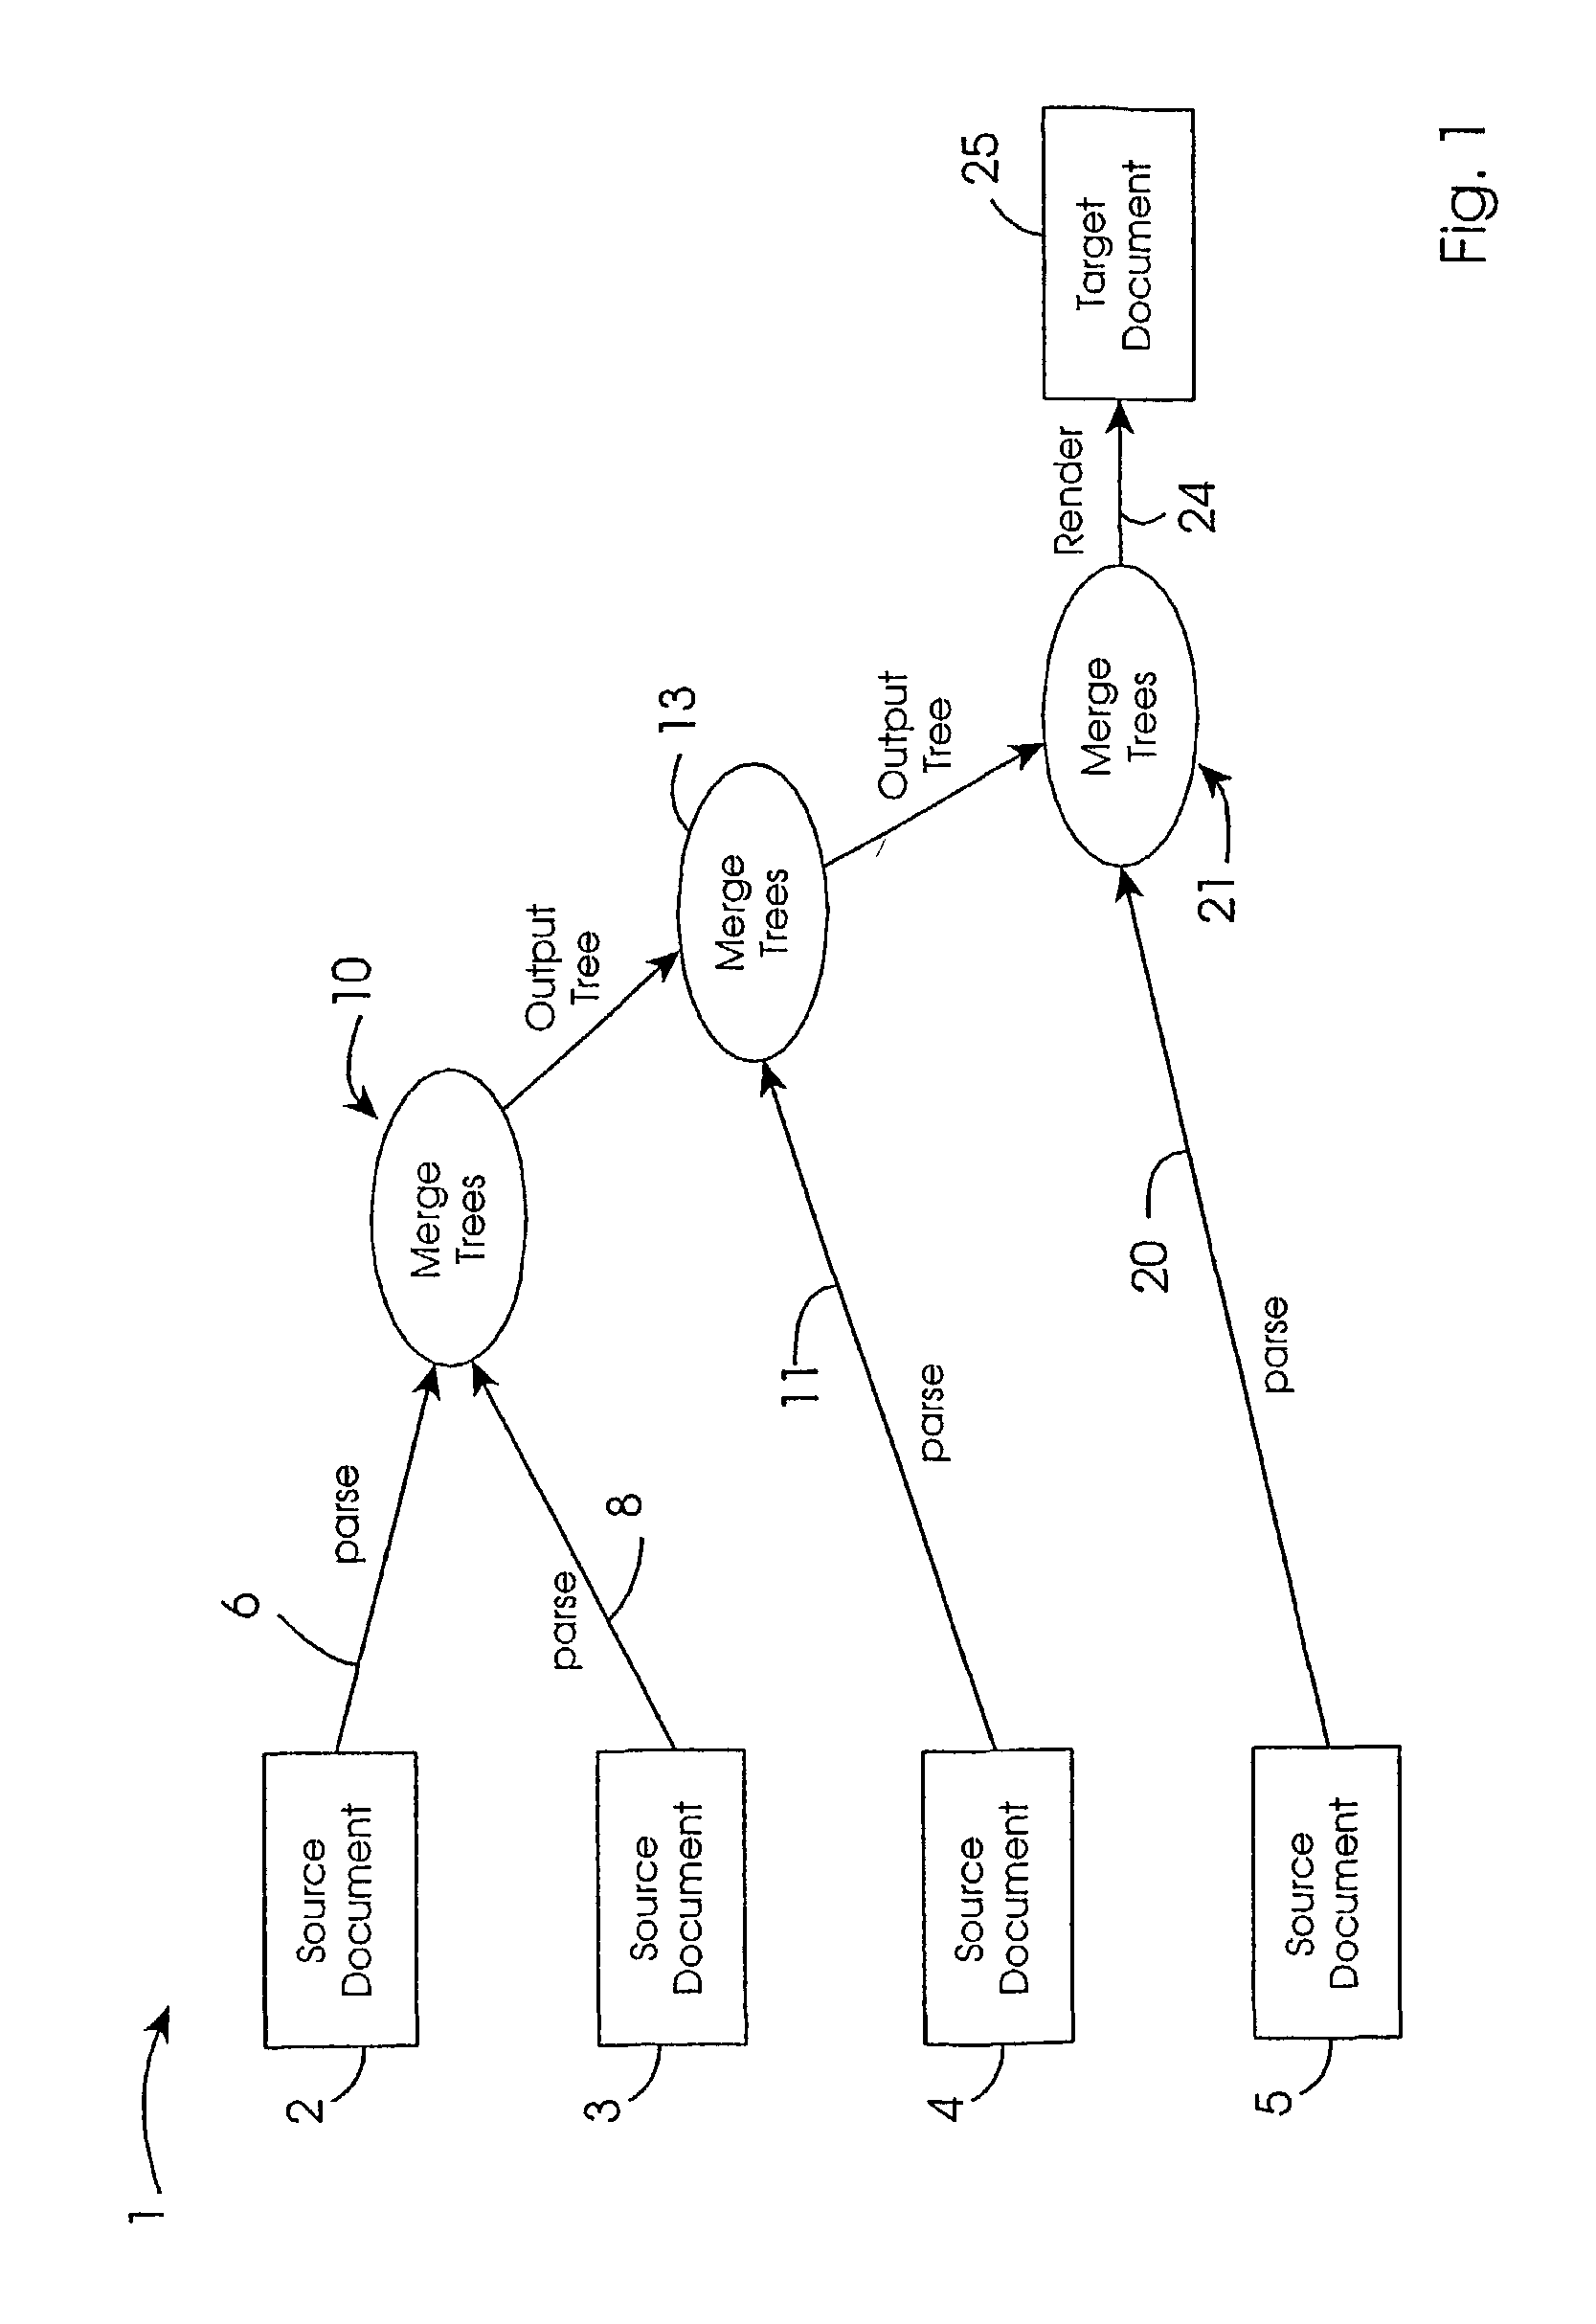 Document processing system and method